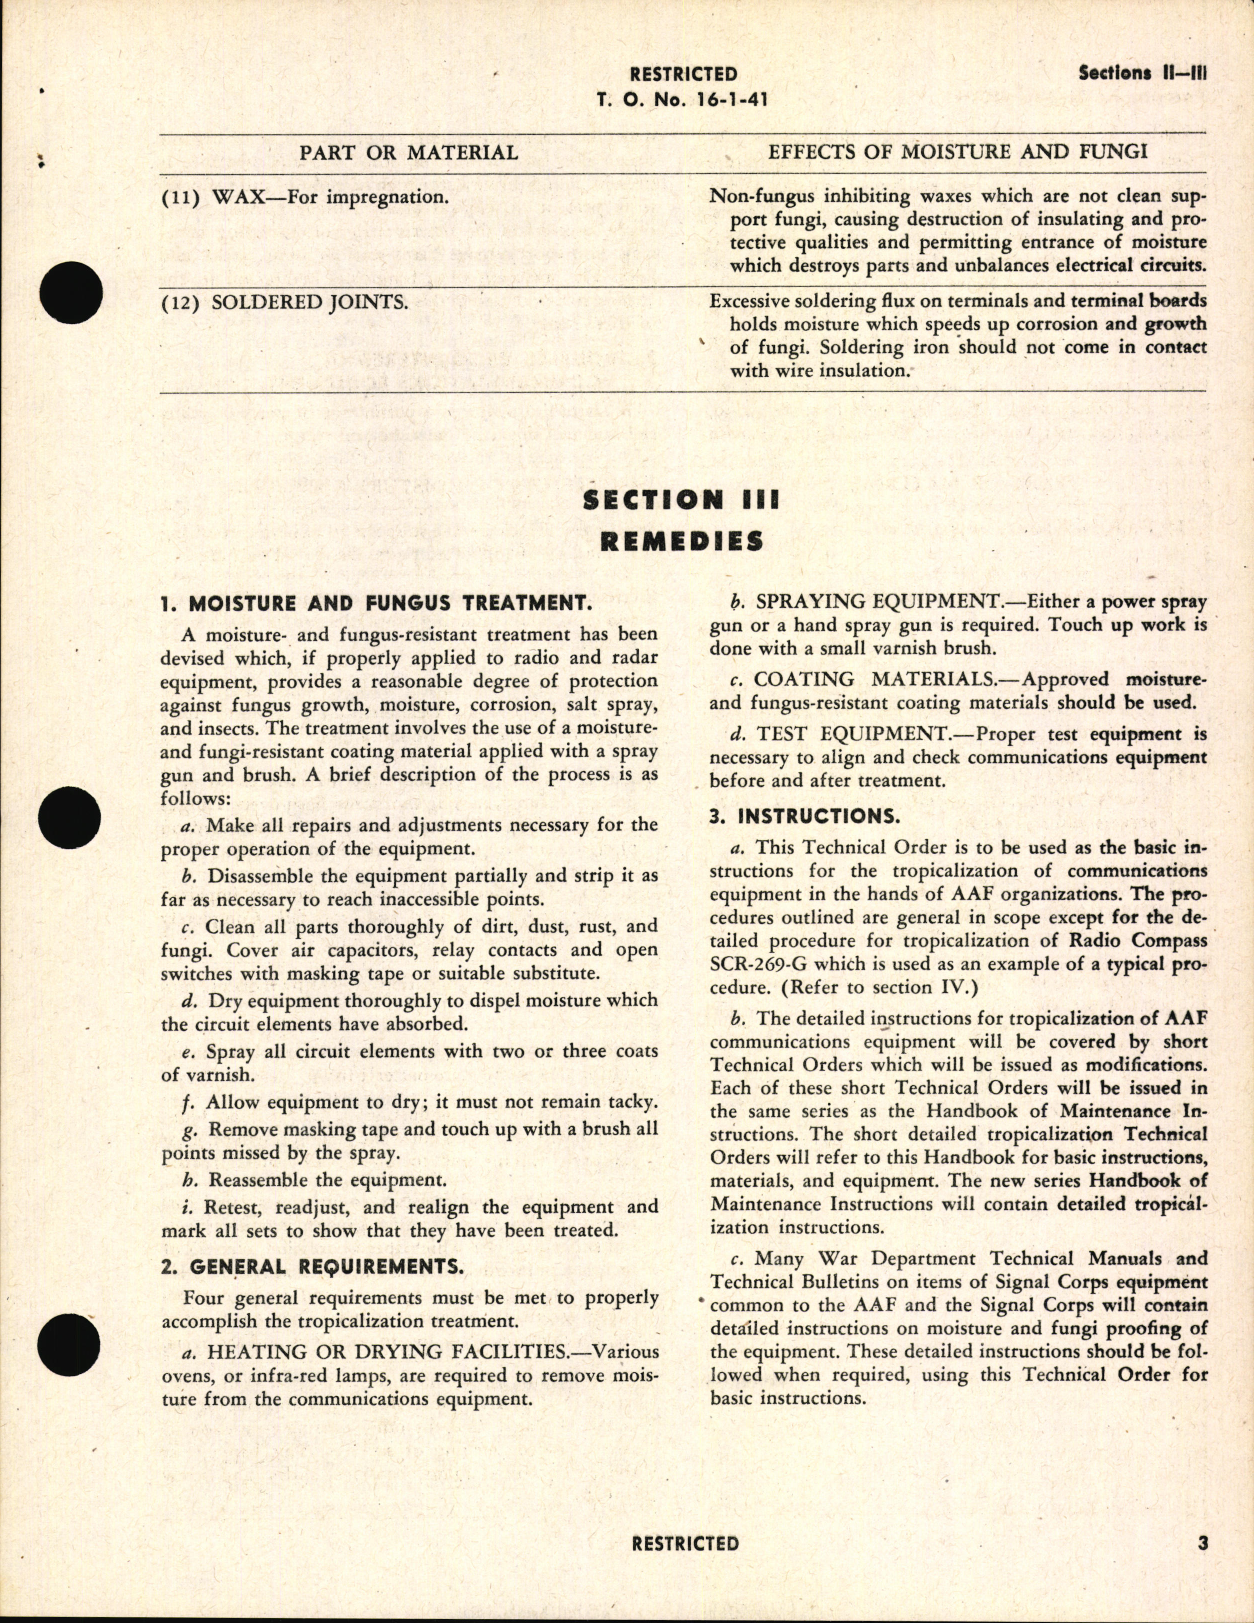 Sample page 7 from AirCorps Library document: General Instructions for Tropicalization of Communications Equipment